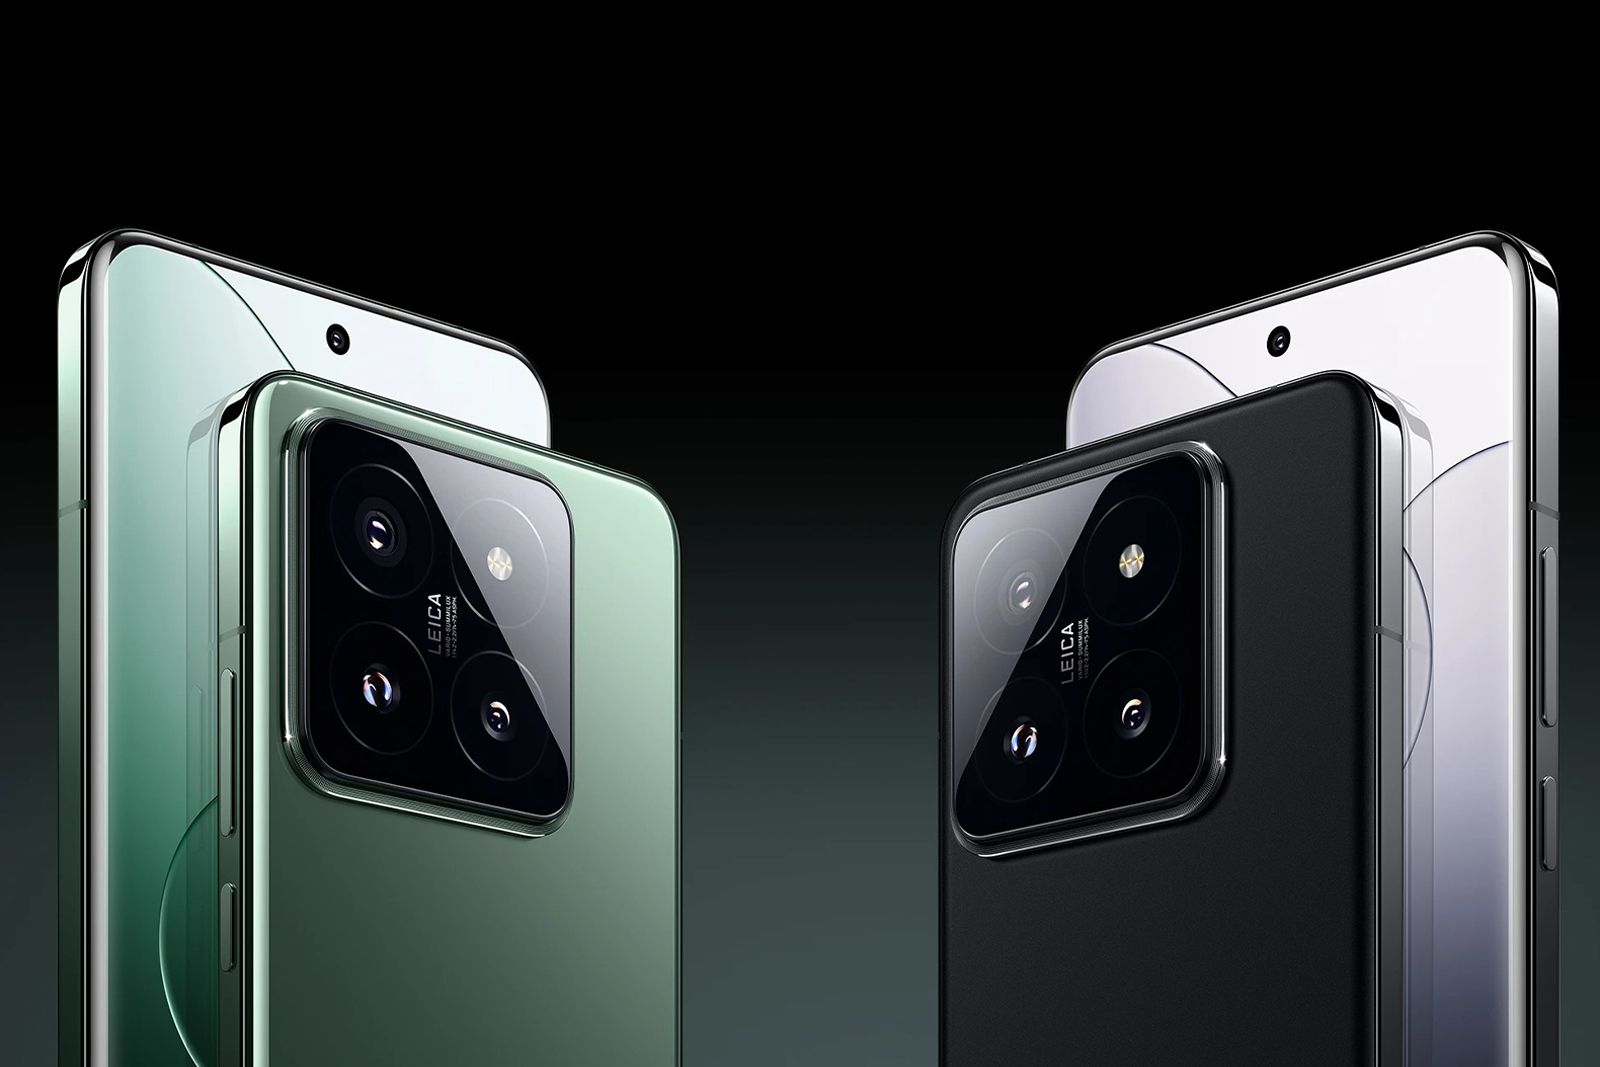 The Xiaomi 13 Ultra is launching soon, will come to global markets